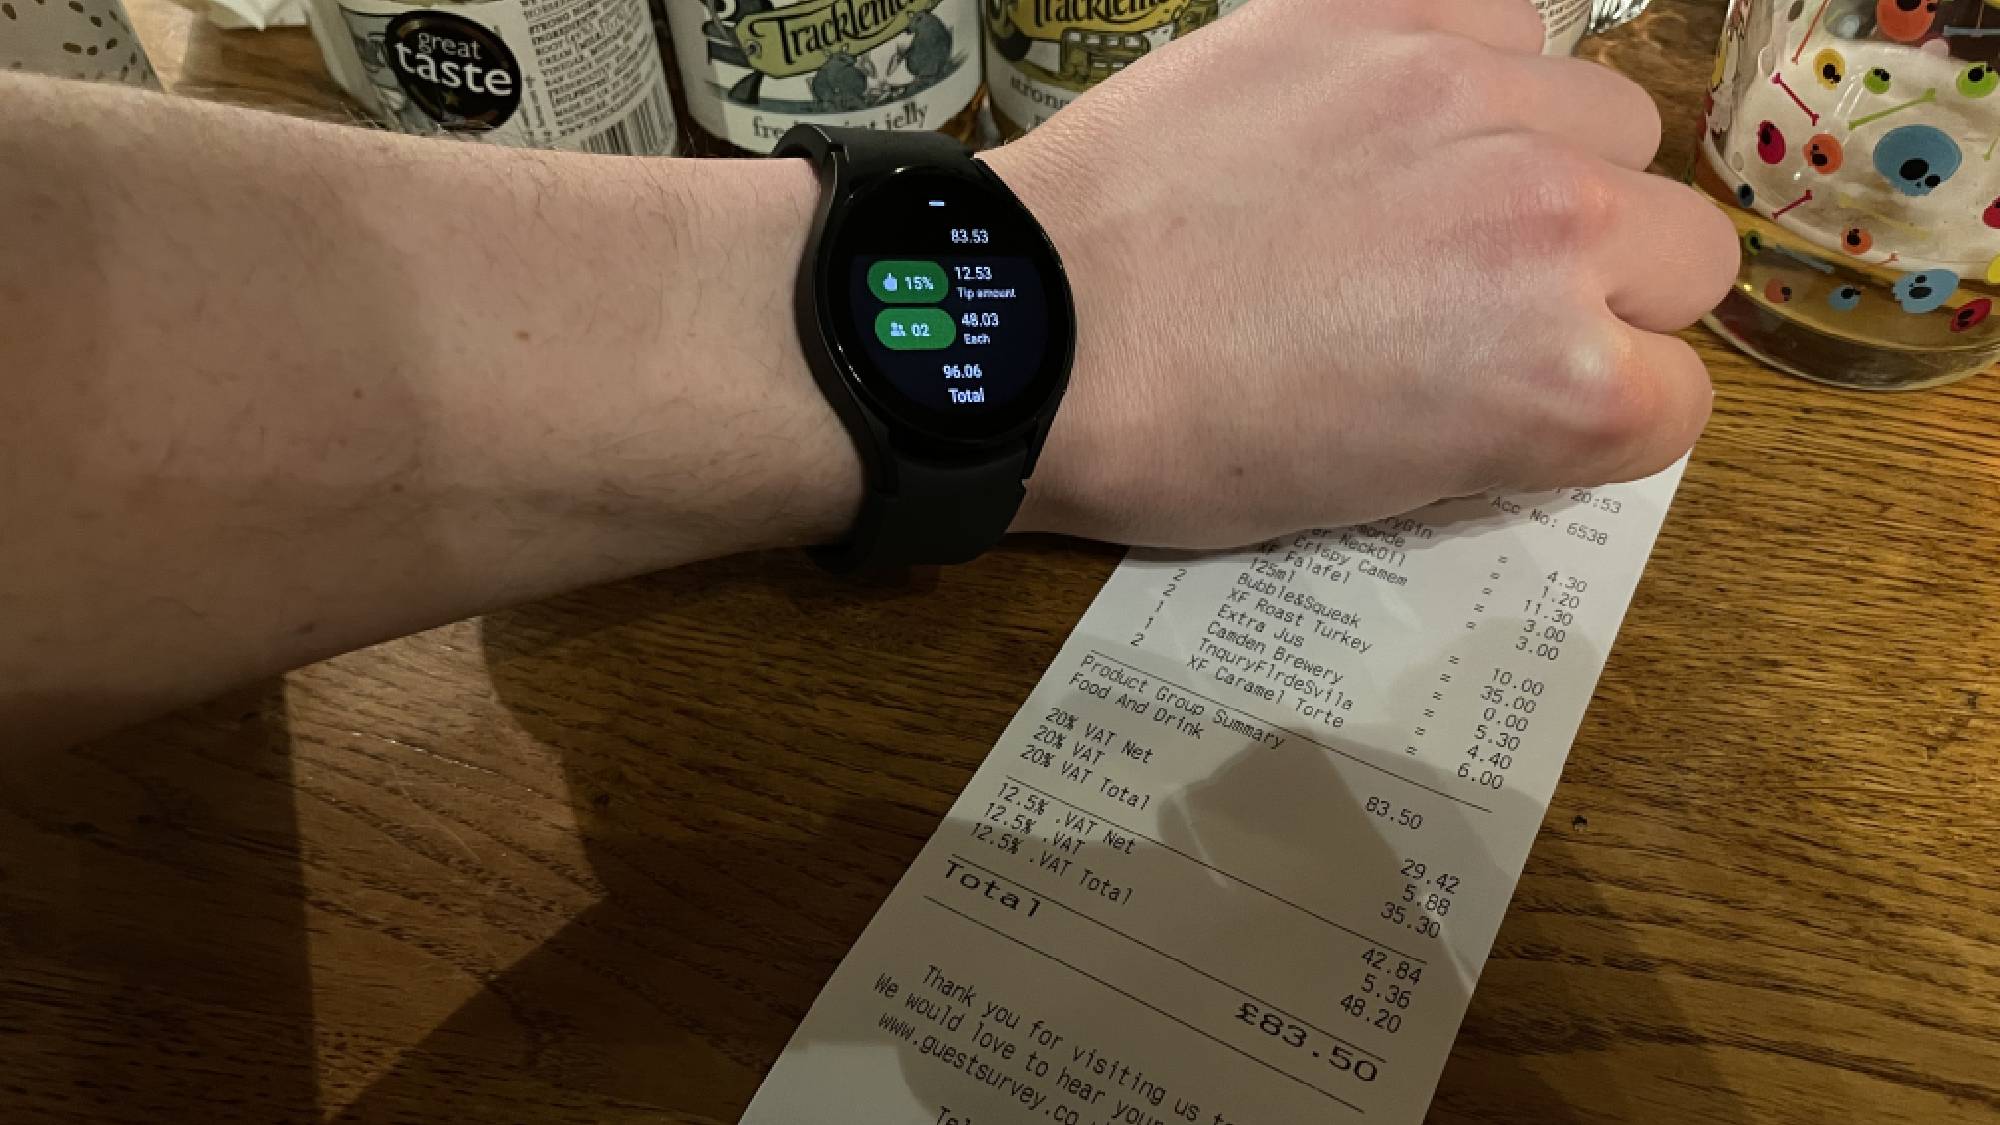 Samsung Galaxy Watch 4 is being used to split the bill